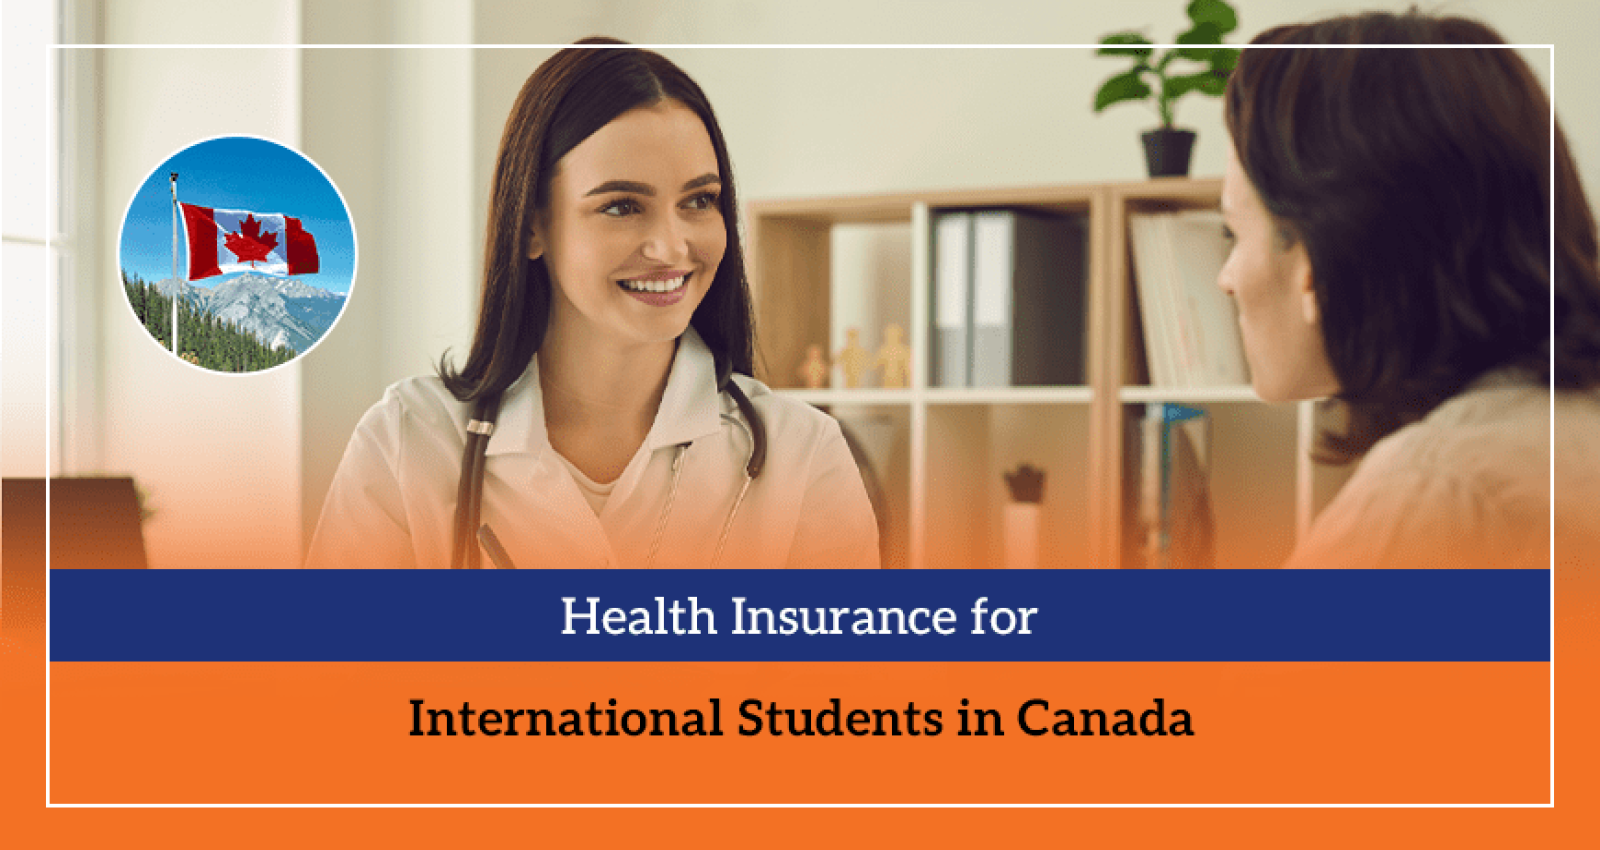 Health Insurance for International Students in Canada